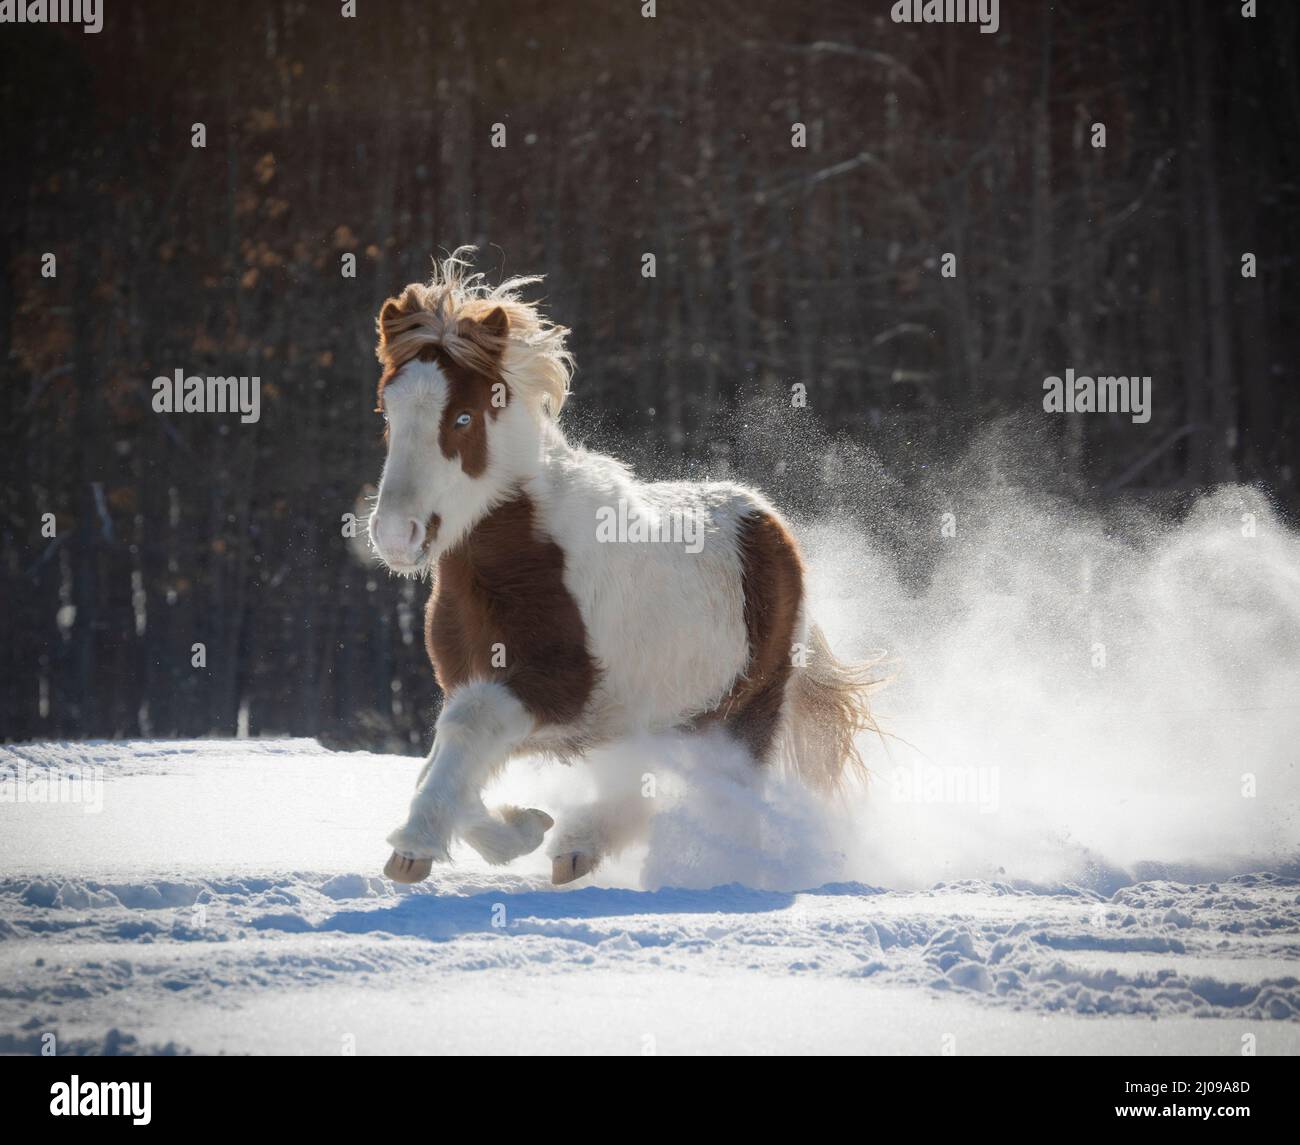 Icelandic horse filly racing through the snow Stock Photo